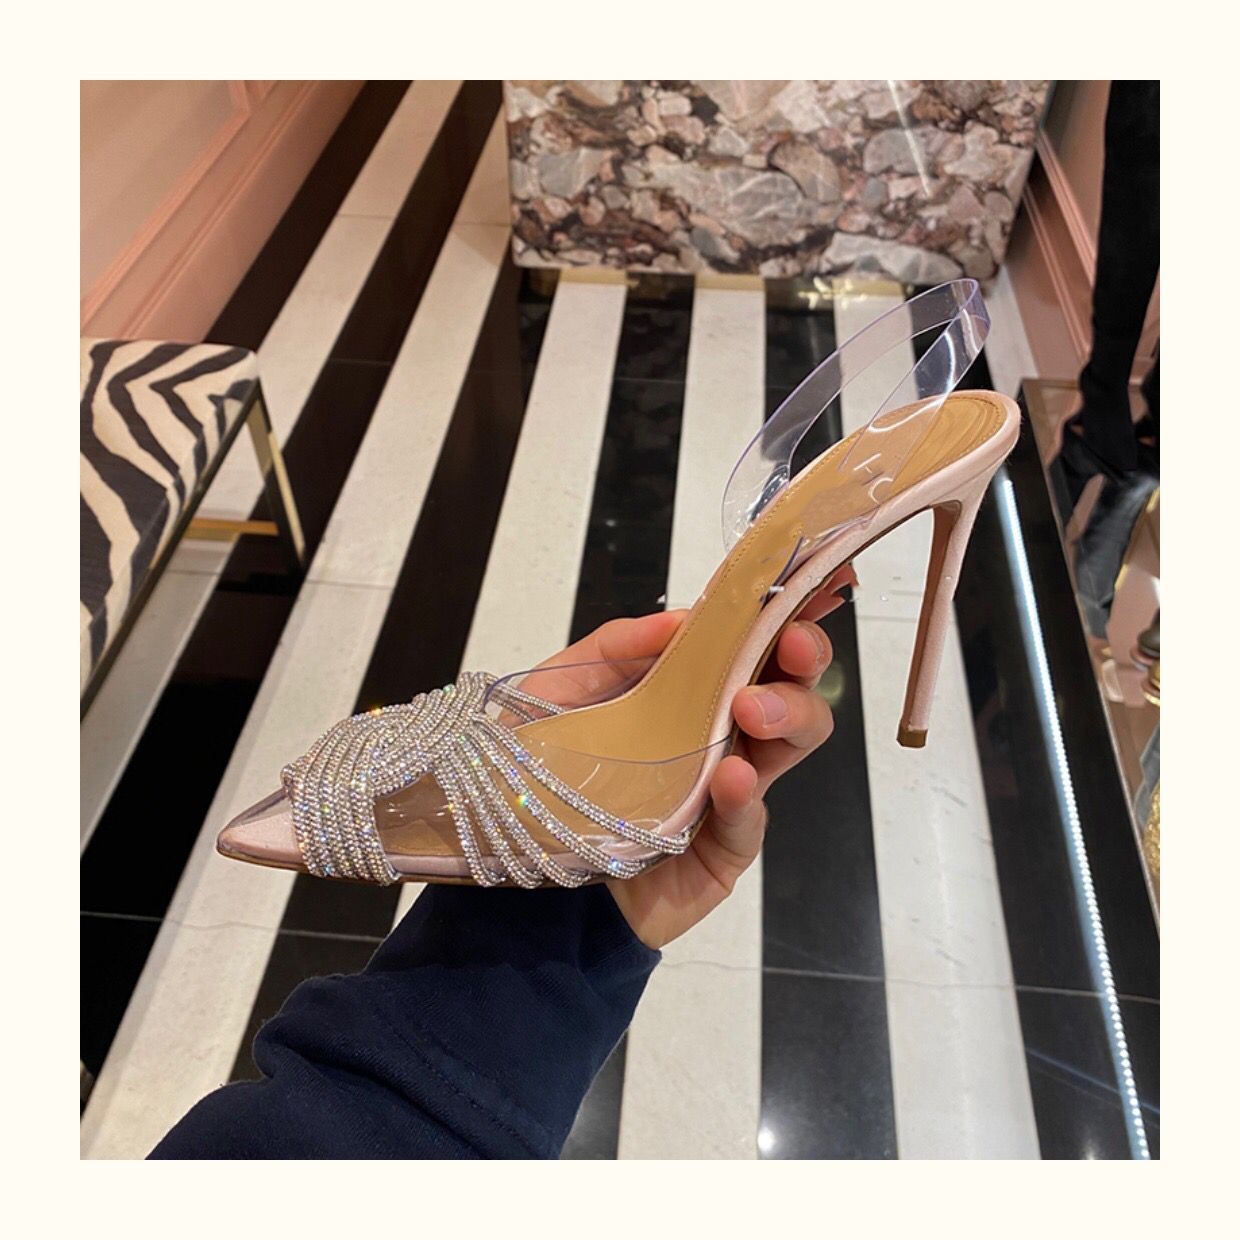 Clear PVC Slingback Women's Sandals Cross Crystal Pointed Toe Stiletto Heel Pumps Shoes